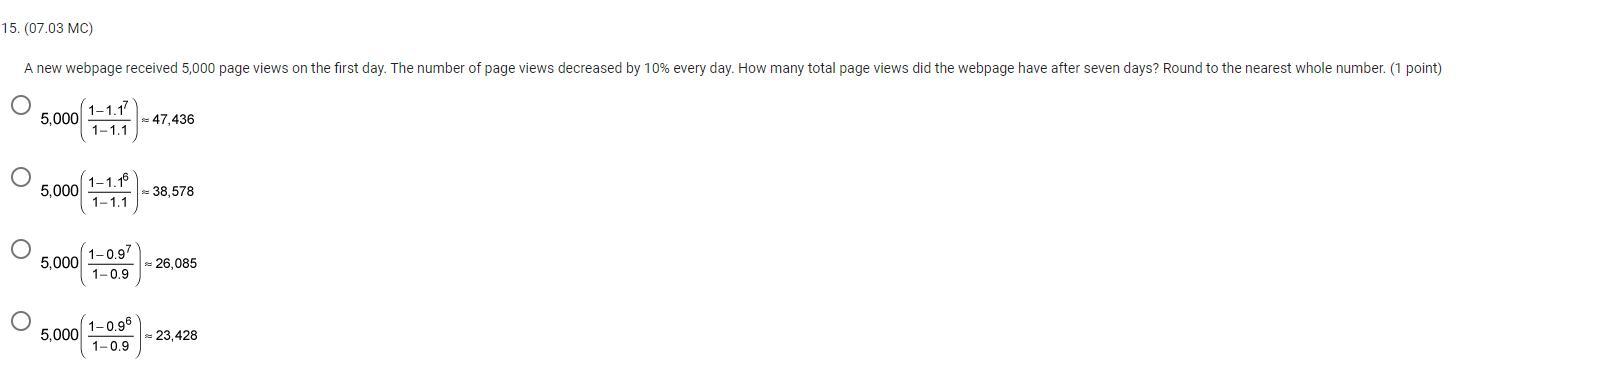 Question 15:A New Webpage Received 5,000 Page Views On The First Day. The Number Of Page Views Decreased